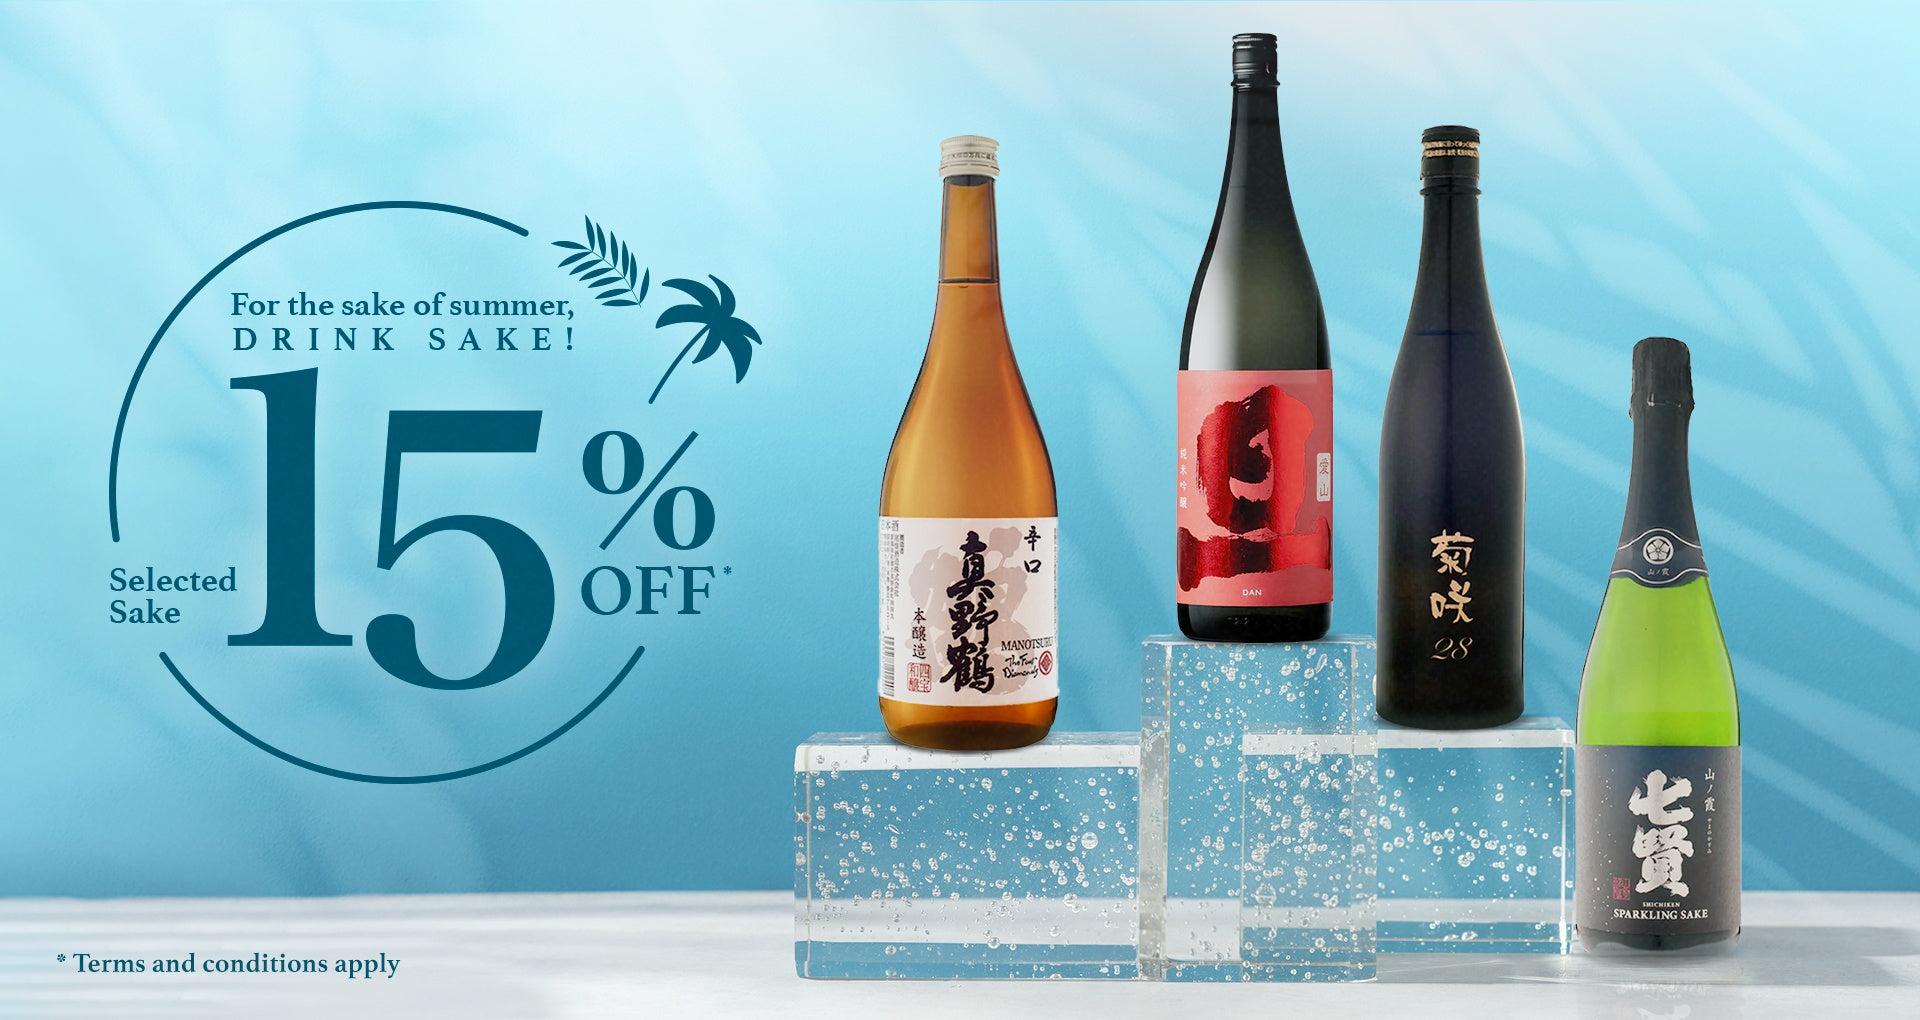 Everything You Need to Know About Japanese SAKE in Under 15